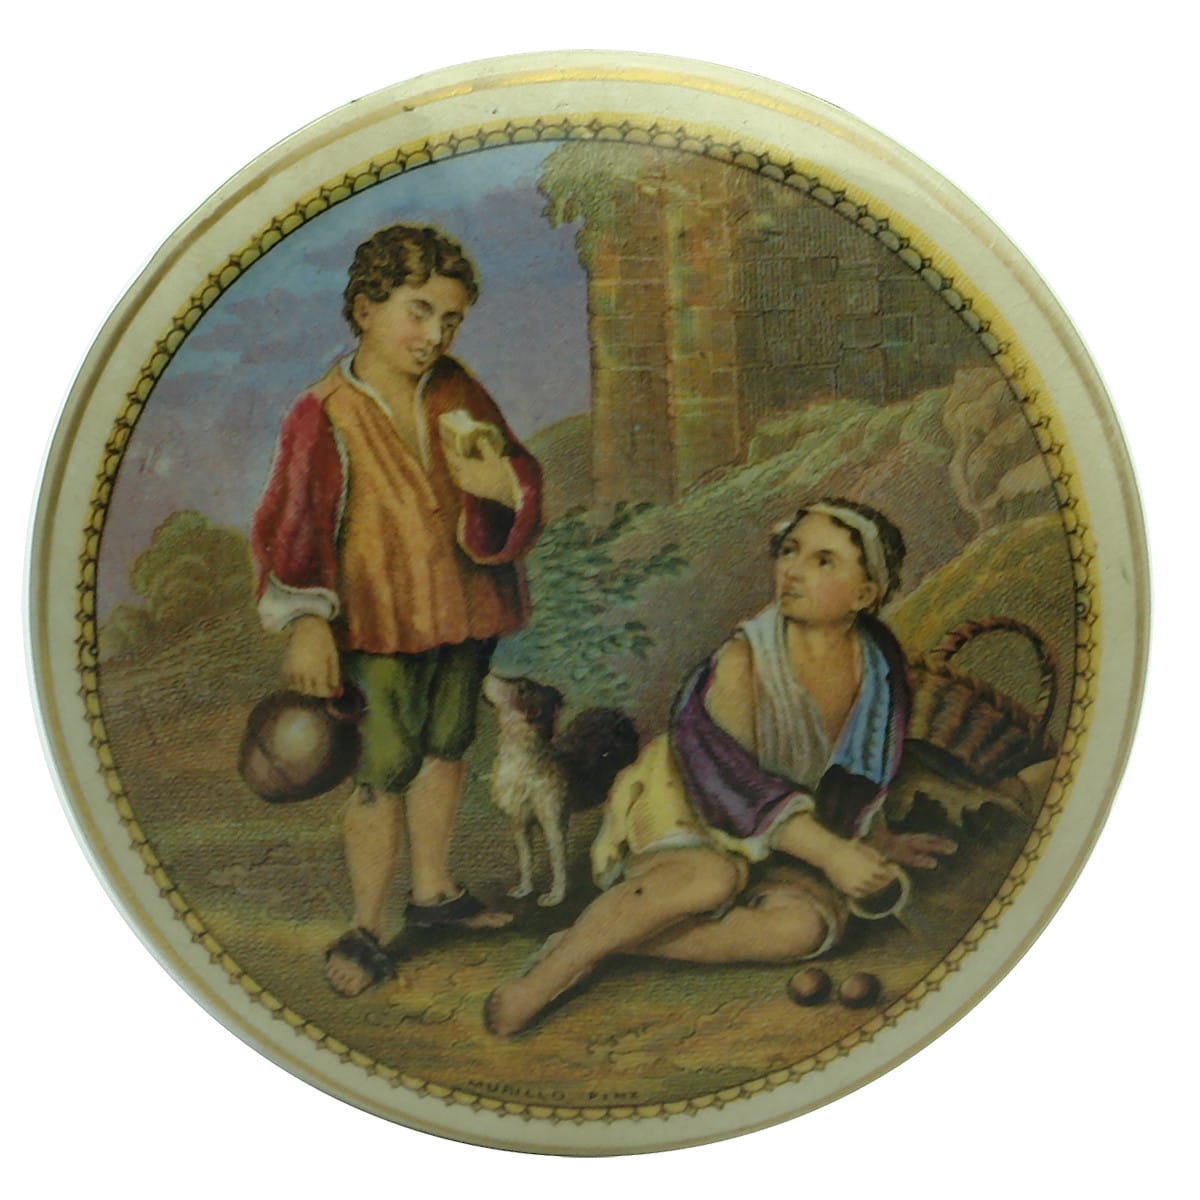 Prattware Lid: Peasant Boys. (Murillo Pinx printed at bottom of picture)